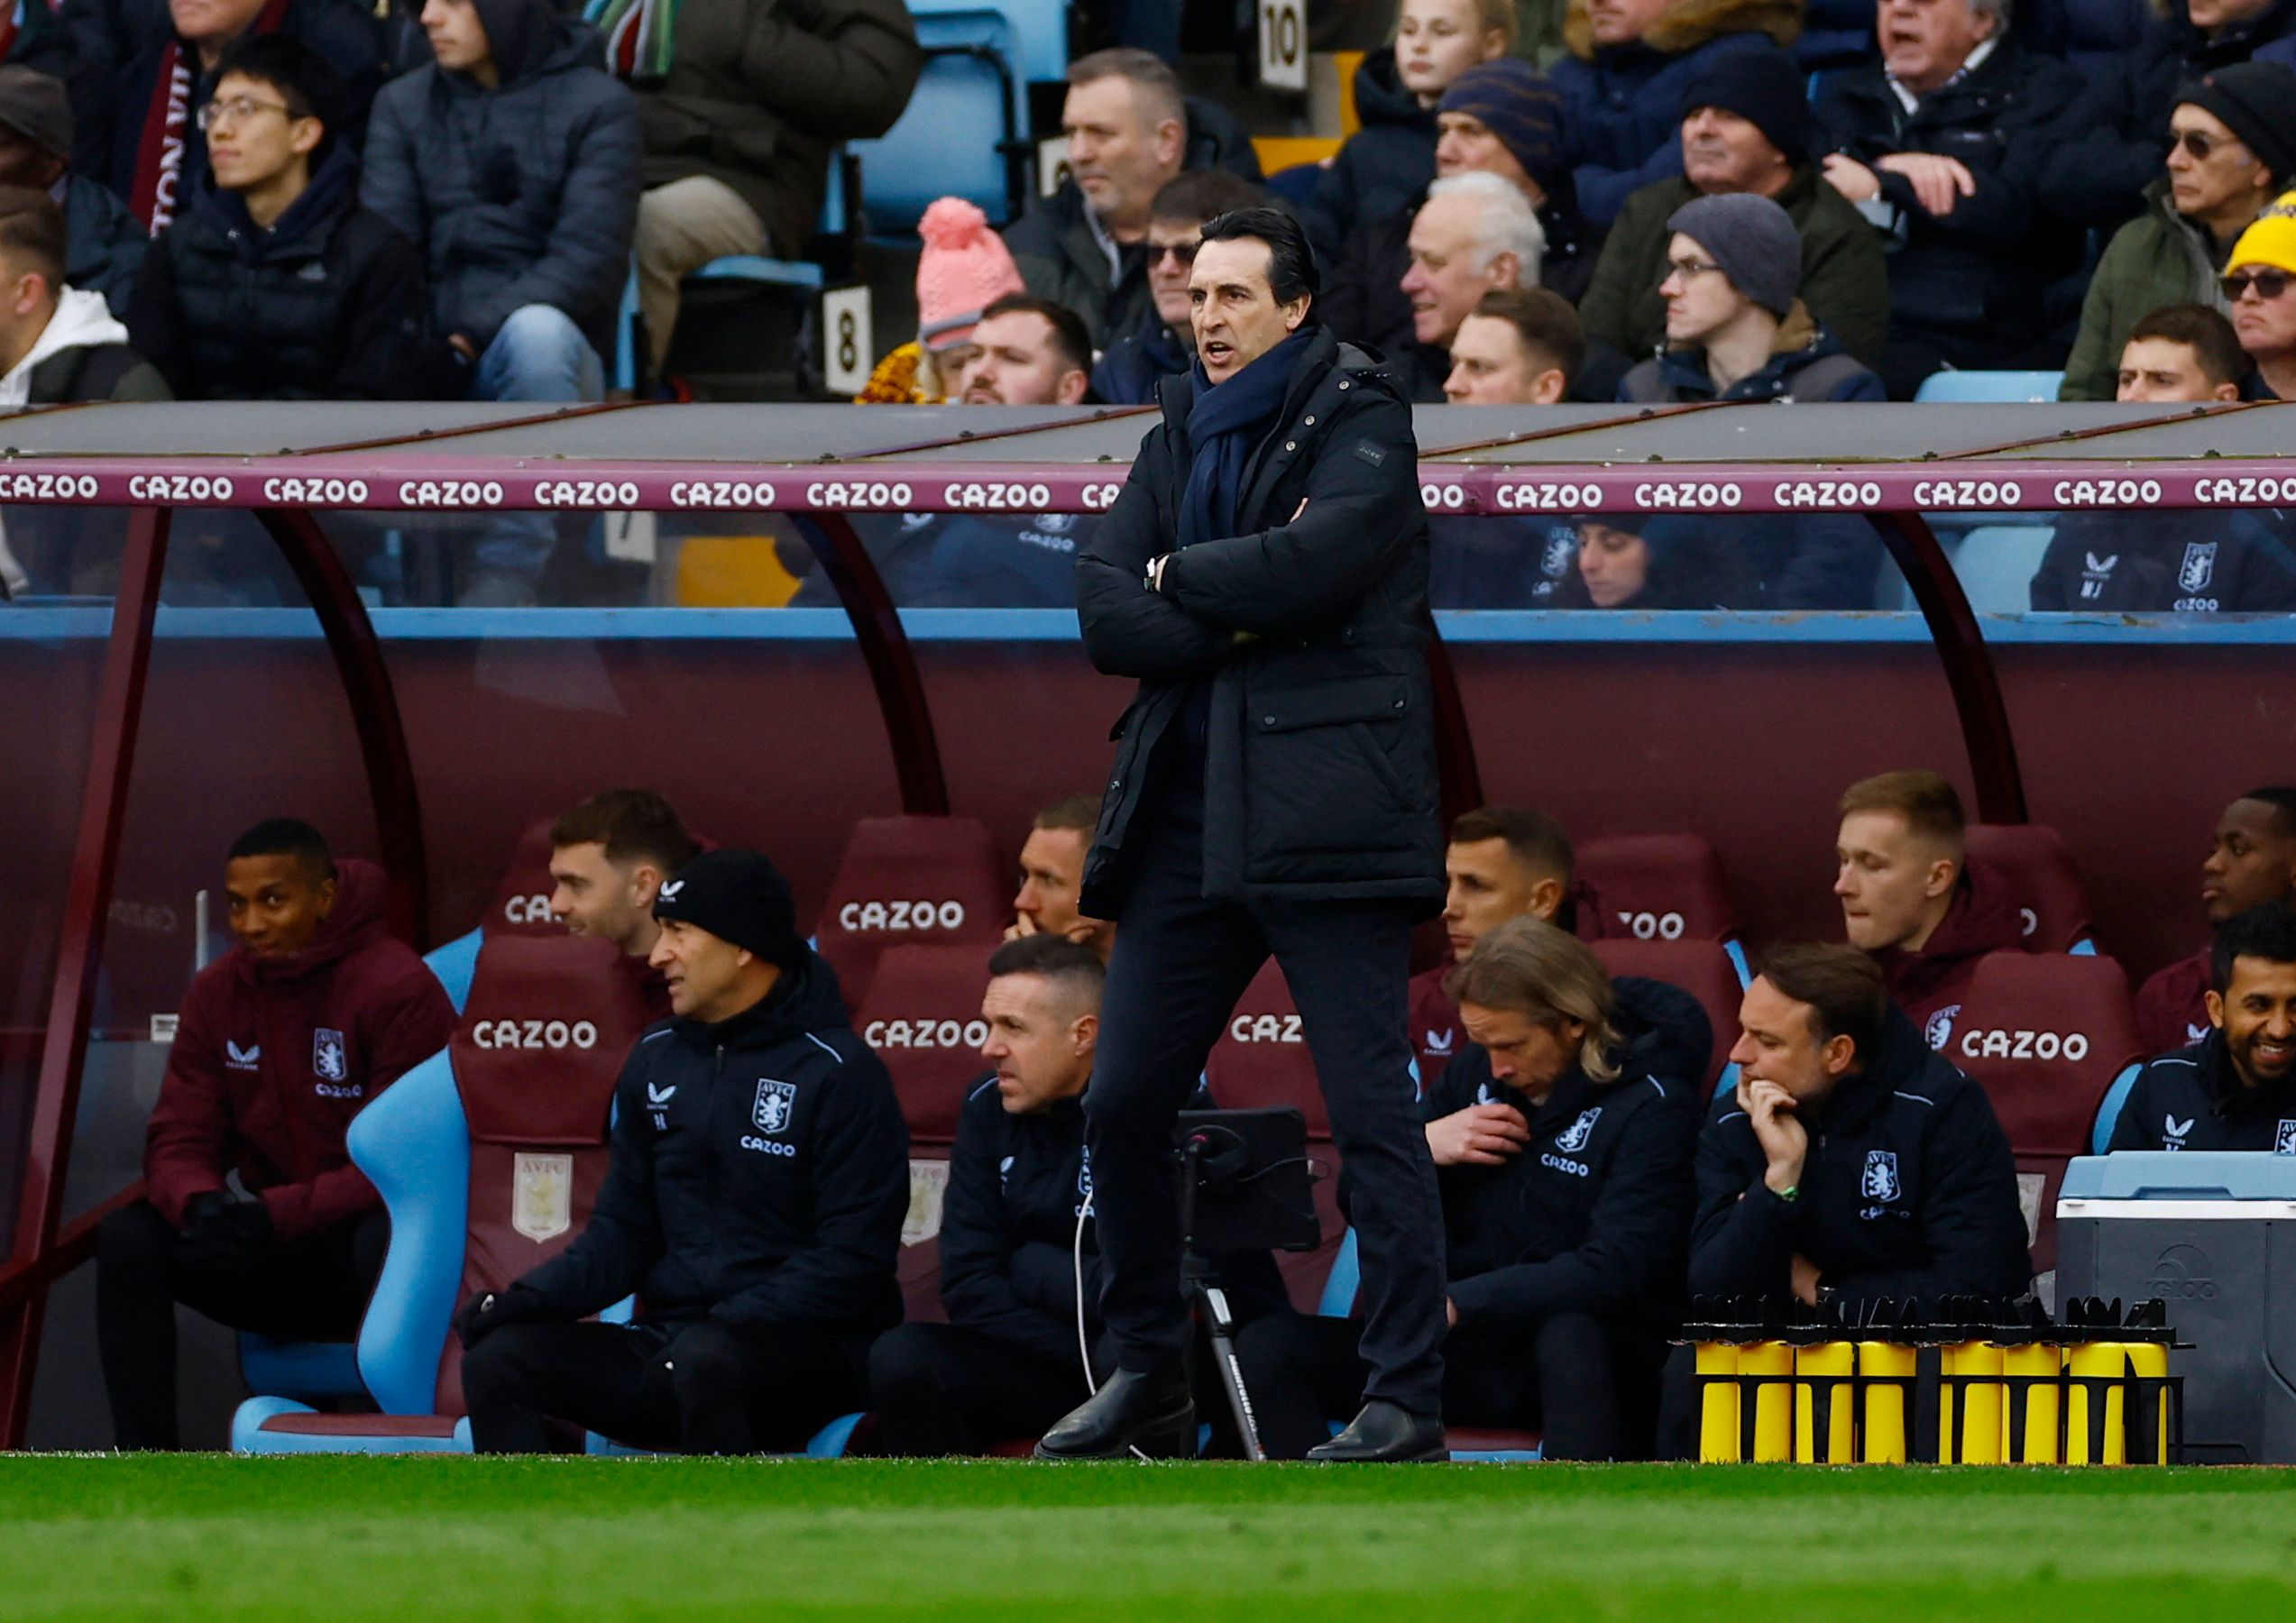 Soccer Football - Premier League - Aston Villa v Crystal Palace - Villa Park, Birmingham, Britain - March 4, 2023 Aston Villa manager Unai Emery reacts Action Images via Reuters/Andrew Boyers EDITORIAL USE ONLY. No use with unauthorized audio, video, data, fixture lists, club/league logos or 'live' services. Online in-match use limited to 75 images, no video emulation. No use in betting, games or single club /league/player publications.  Please contact your account representative for further det